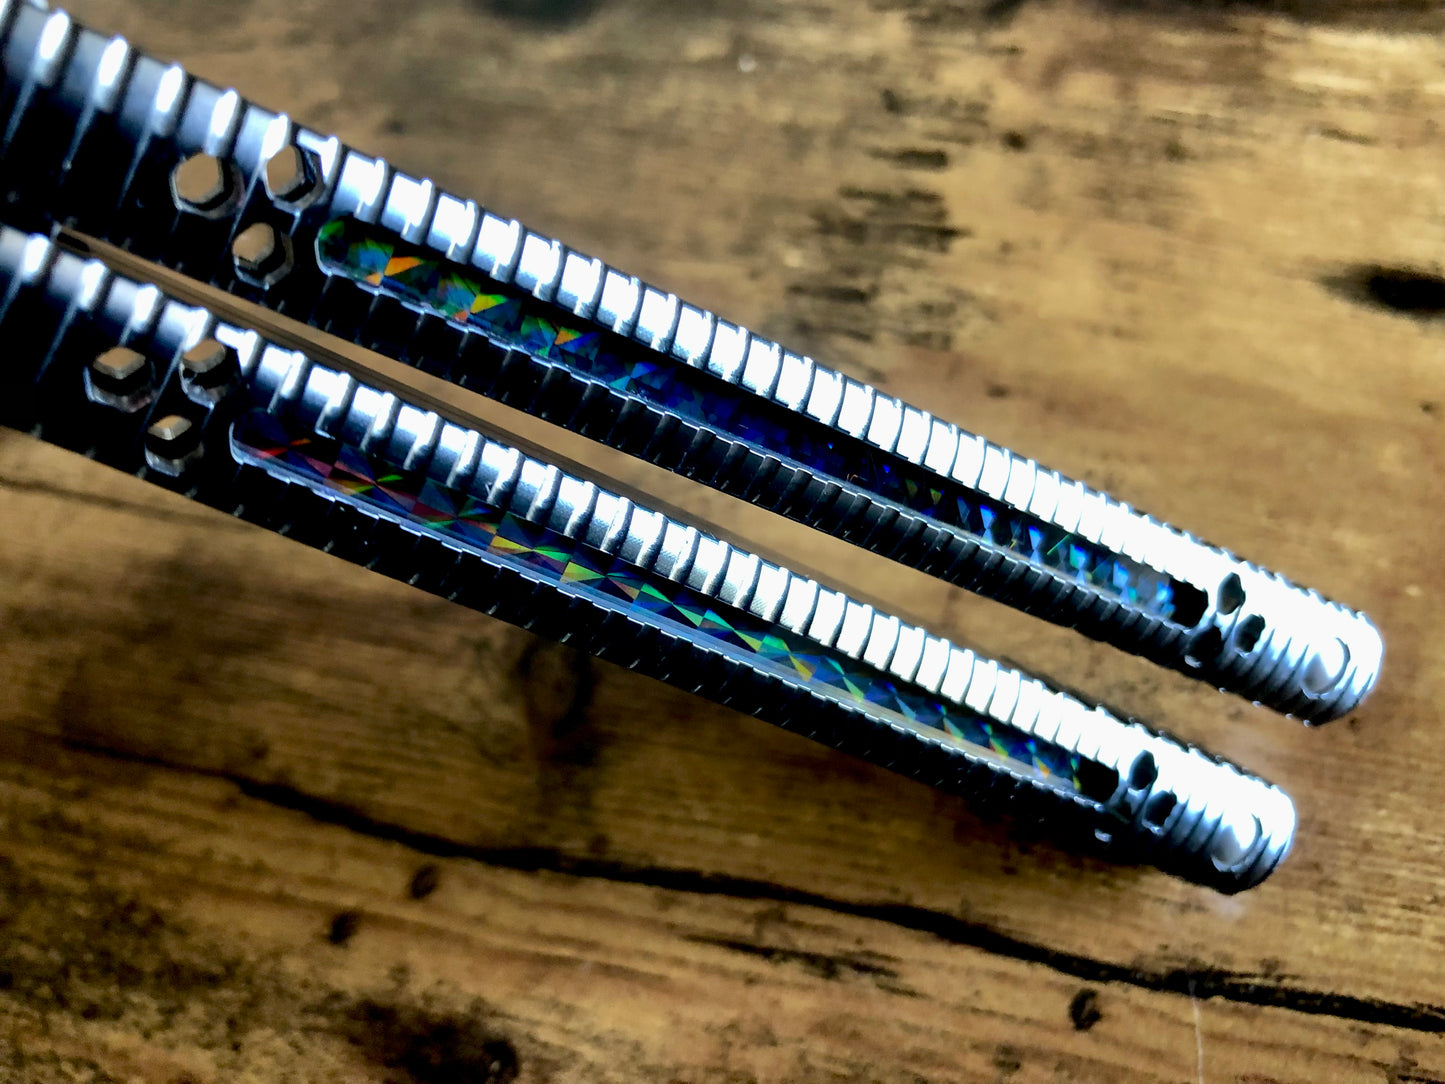 Adjust the balance of your B.A. Balis Nakiri balisong with these custom-made Zippy spacers.&nbsp;The Zippy spacers offer reduced handle bias compared to the stock spacers, and offer 3x intermediate balance configurations so you can fine-tune the balance to your preference. Cosmetic blade inserts are included, and optional handle inlays add a pop of color.&nbsp;